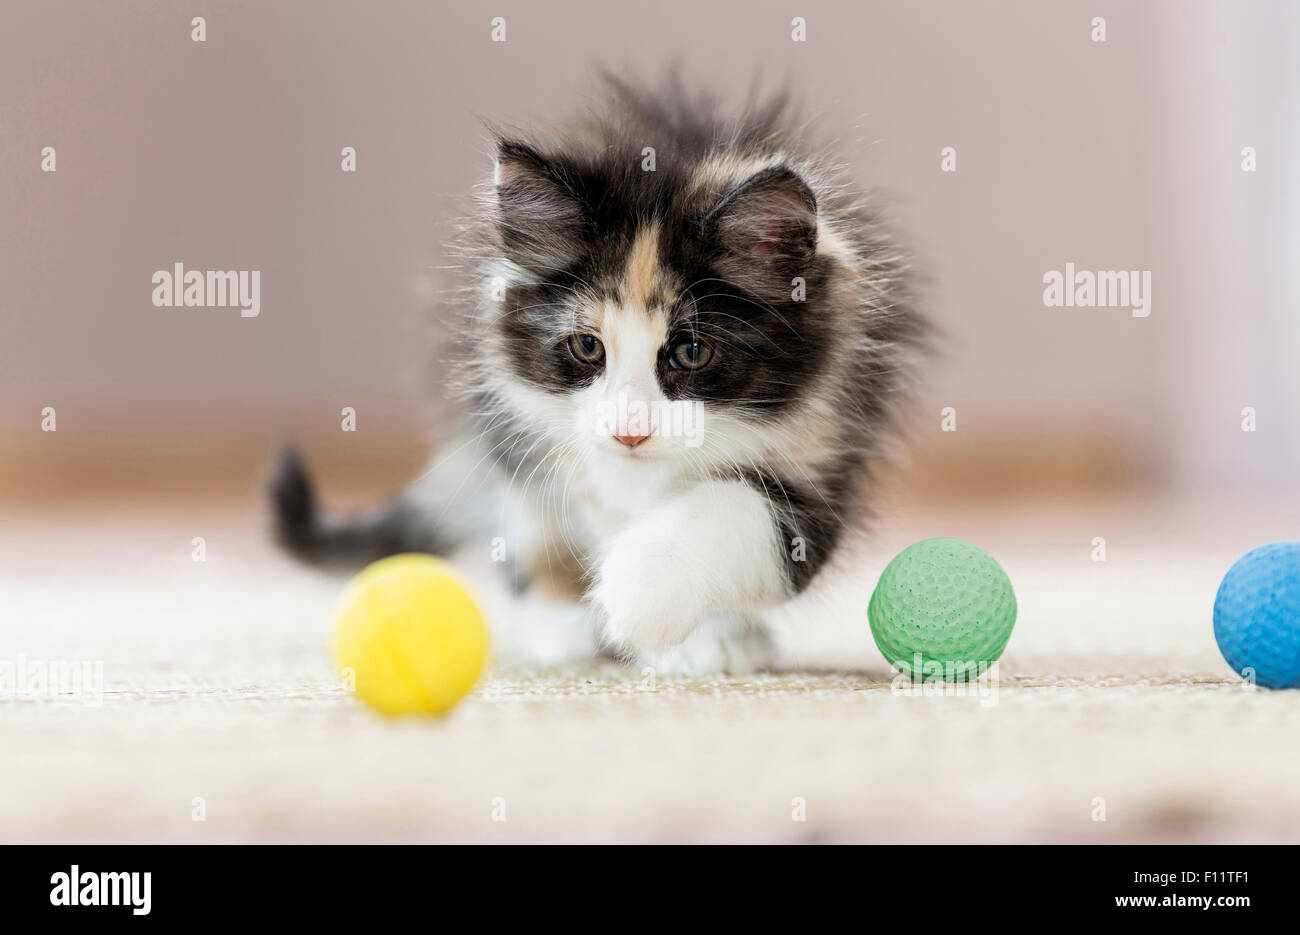 Norwegian Forest Cat. Kitten playing with soft balls, Stock Photo